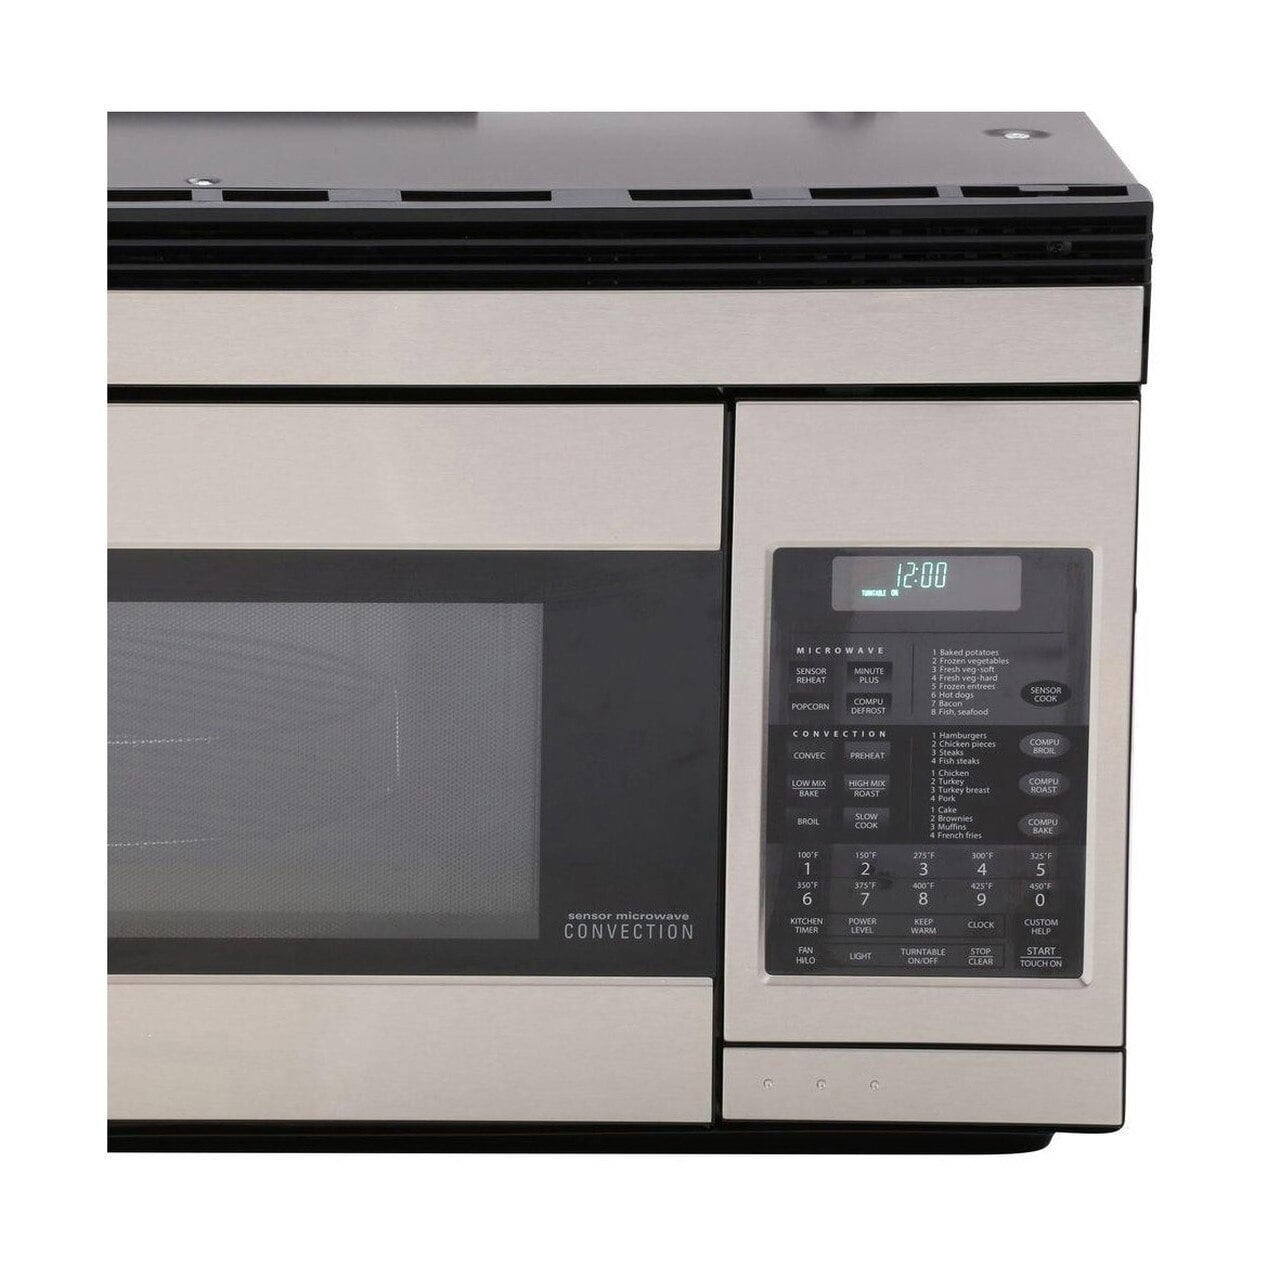 Sharp R1874TY 1.1 Cu. Ft. 850W Sharp Stainless Steel Over-The-Range Convection Microwave Oven